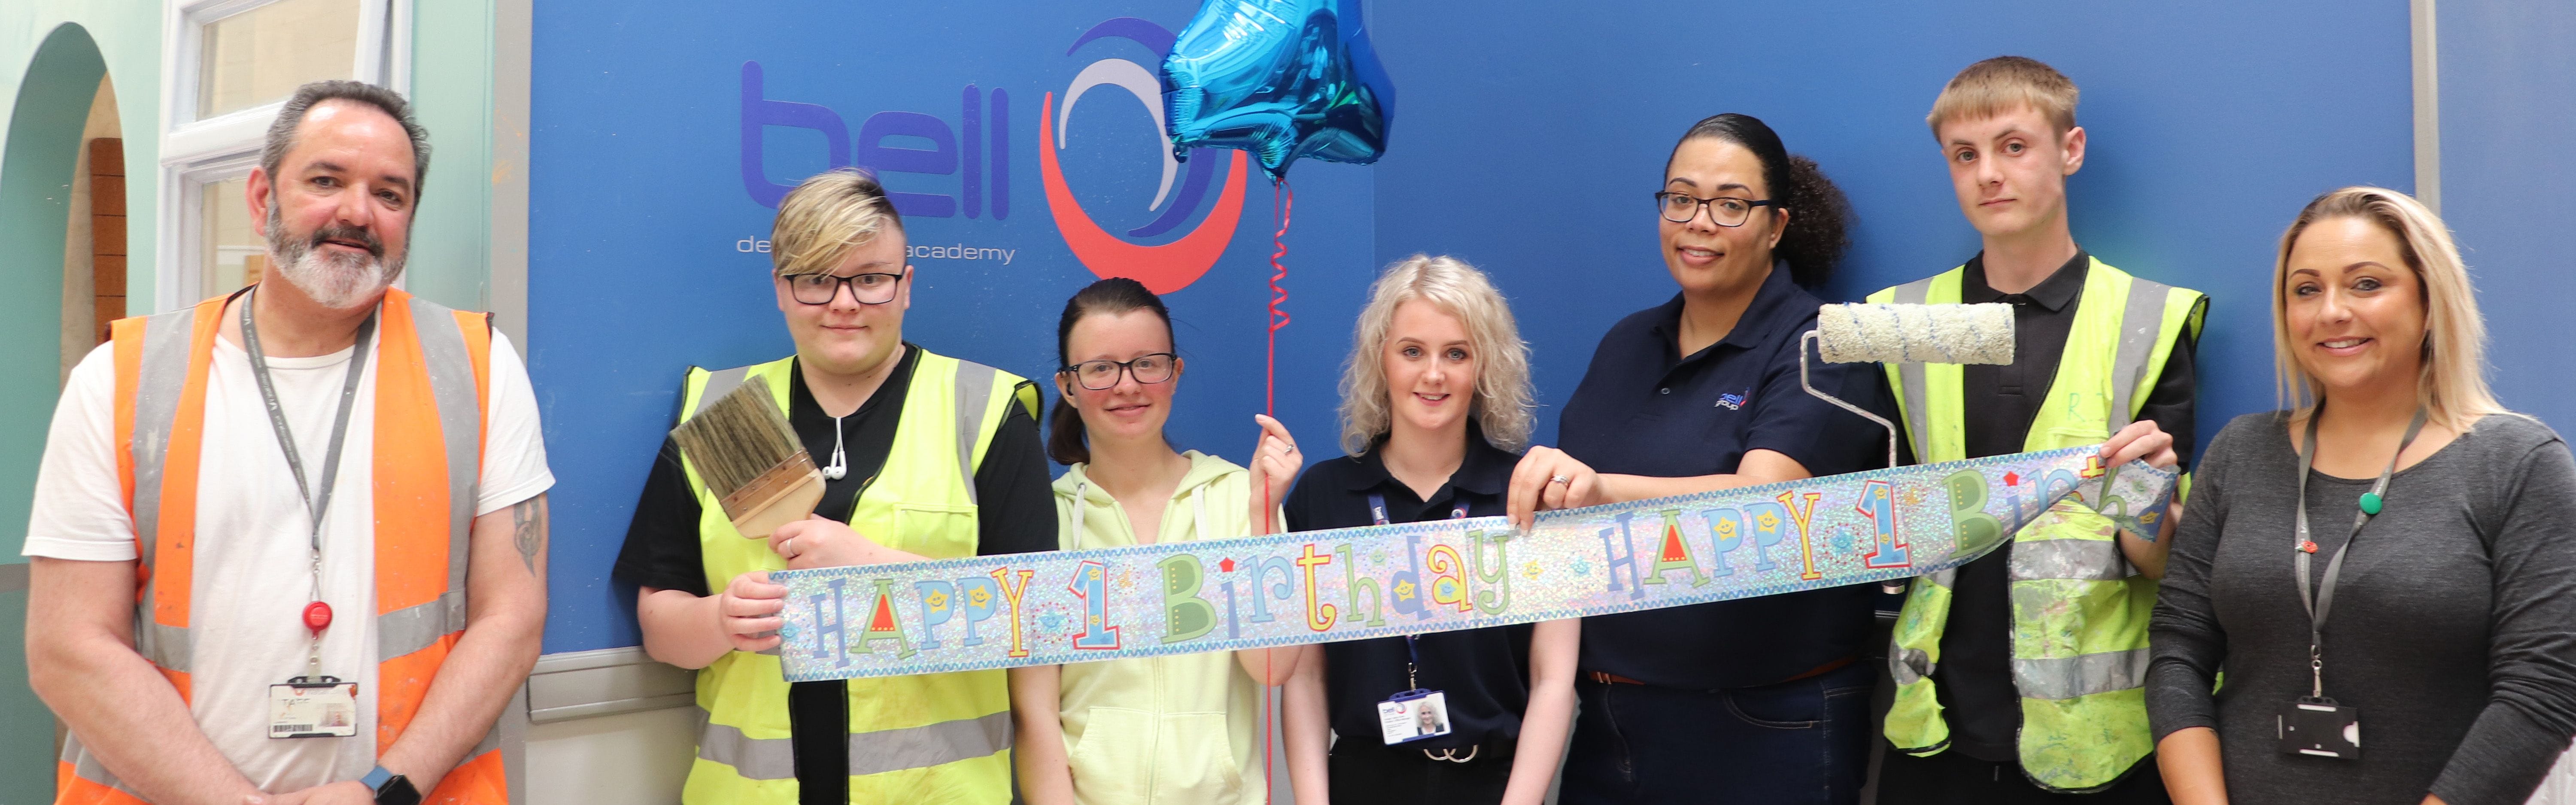 students, staff and Bell Academy representatives pose with first birthday banner facing